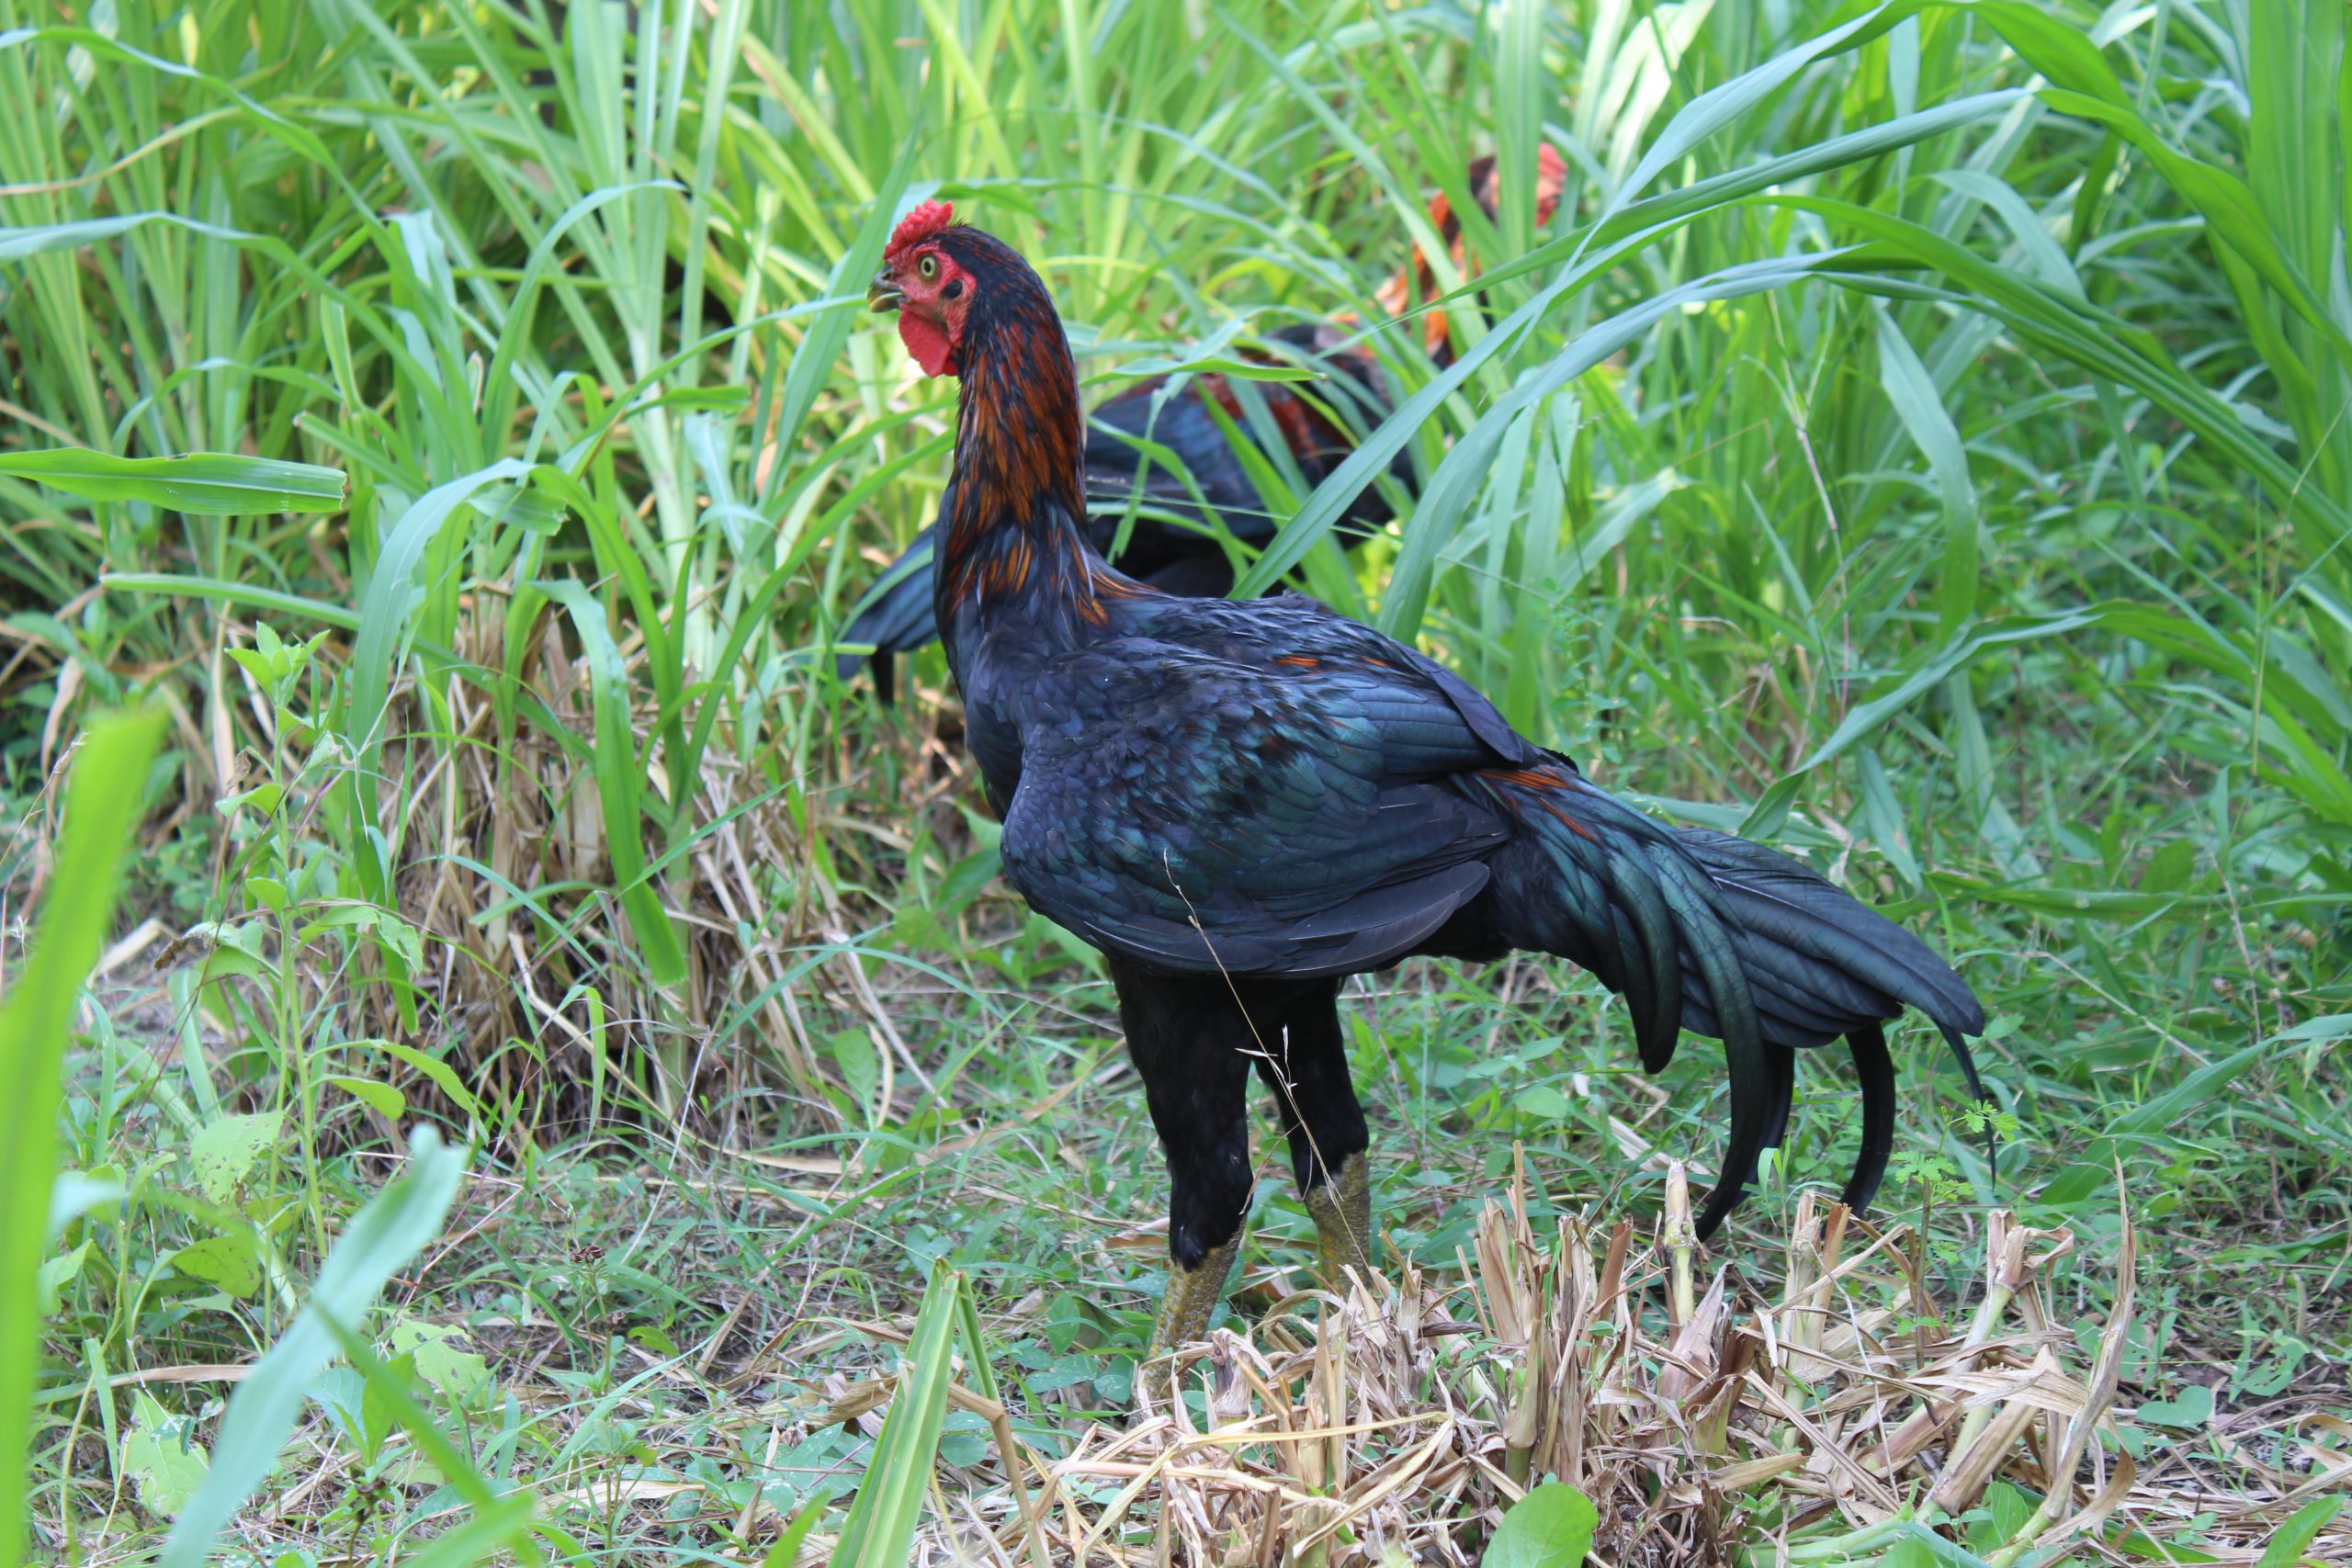 Black Indian Rooster in the grass